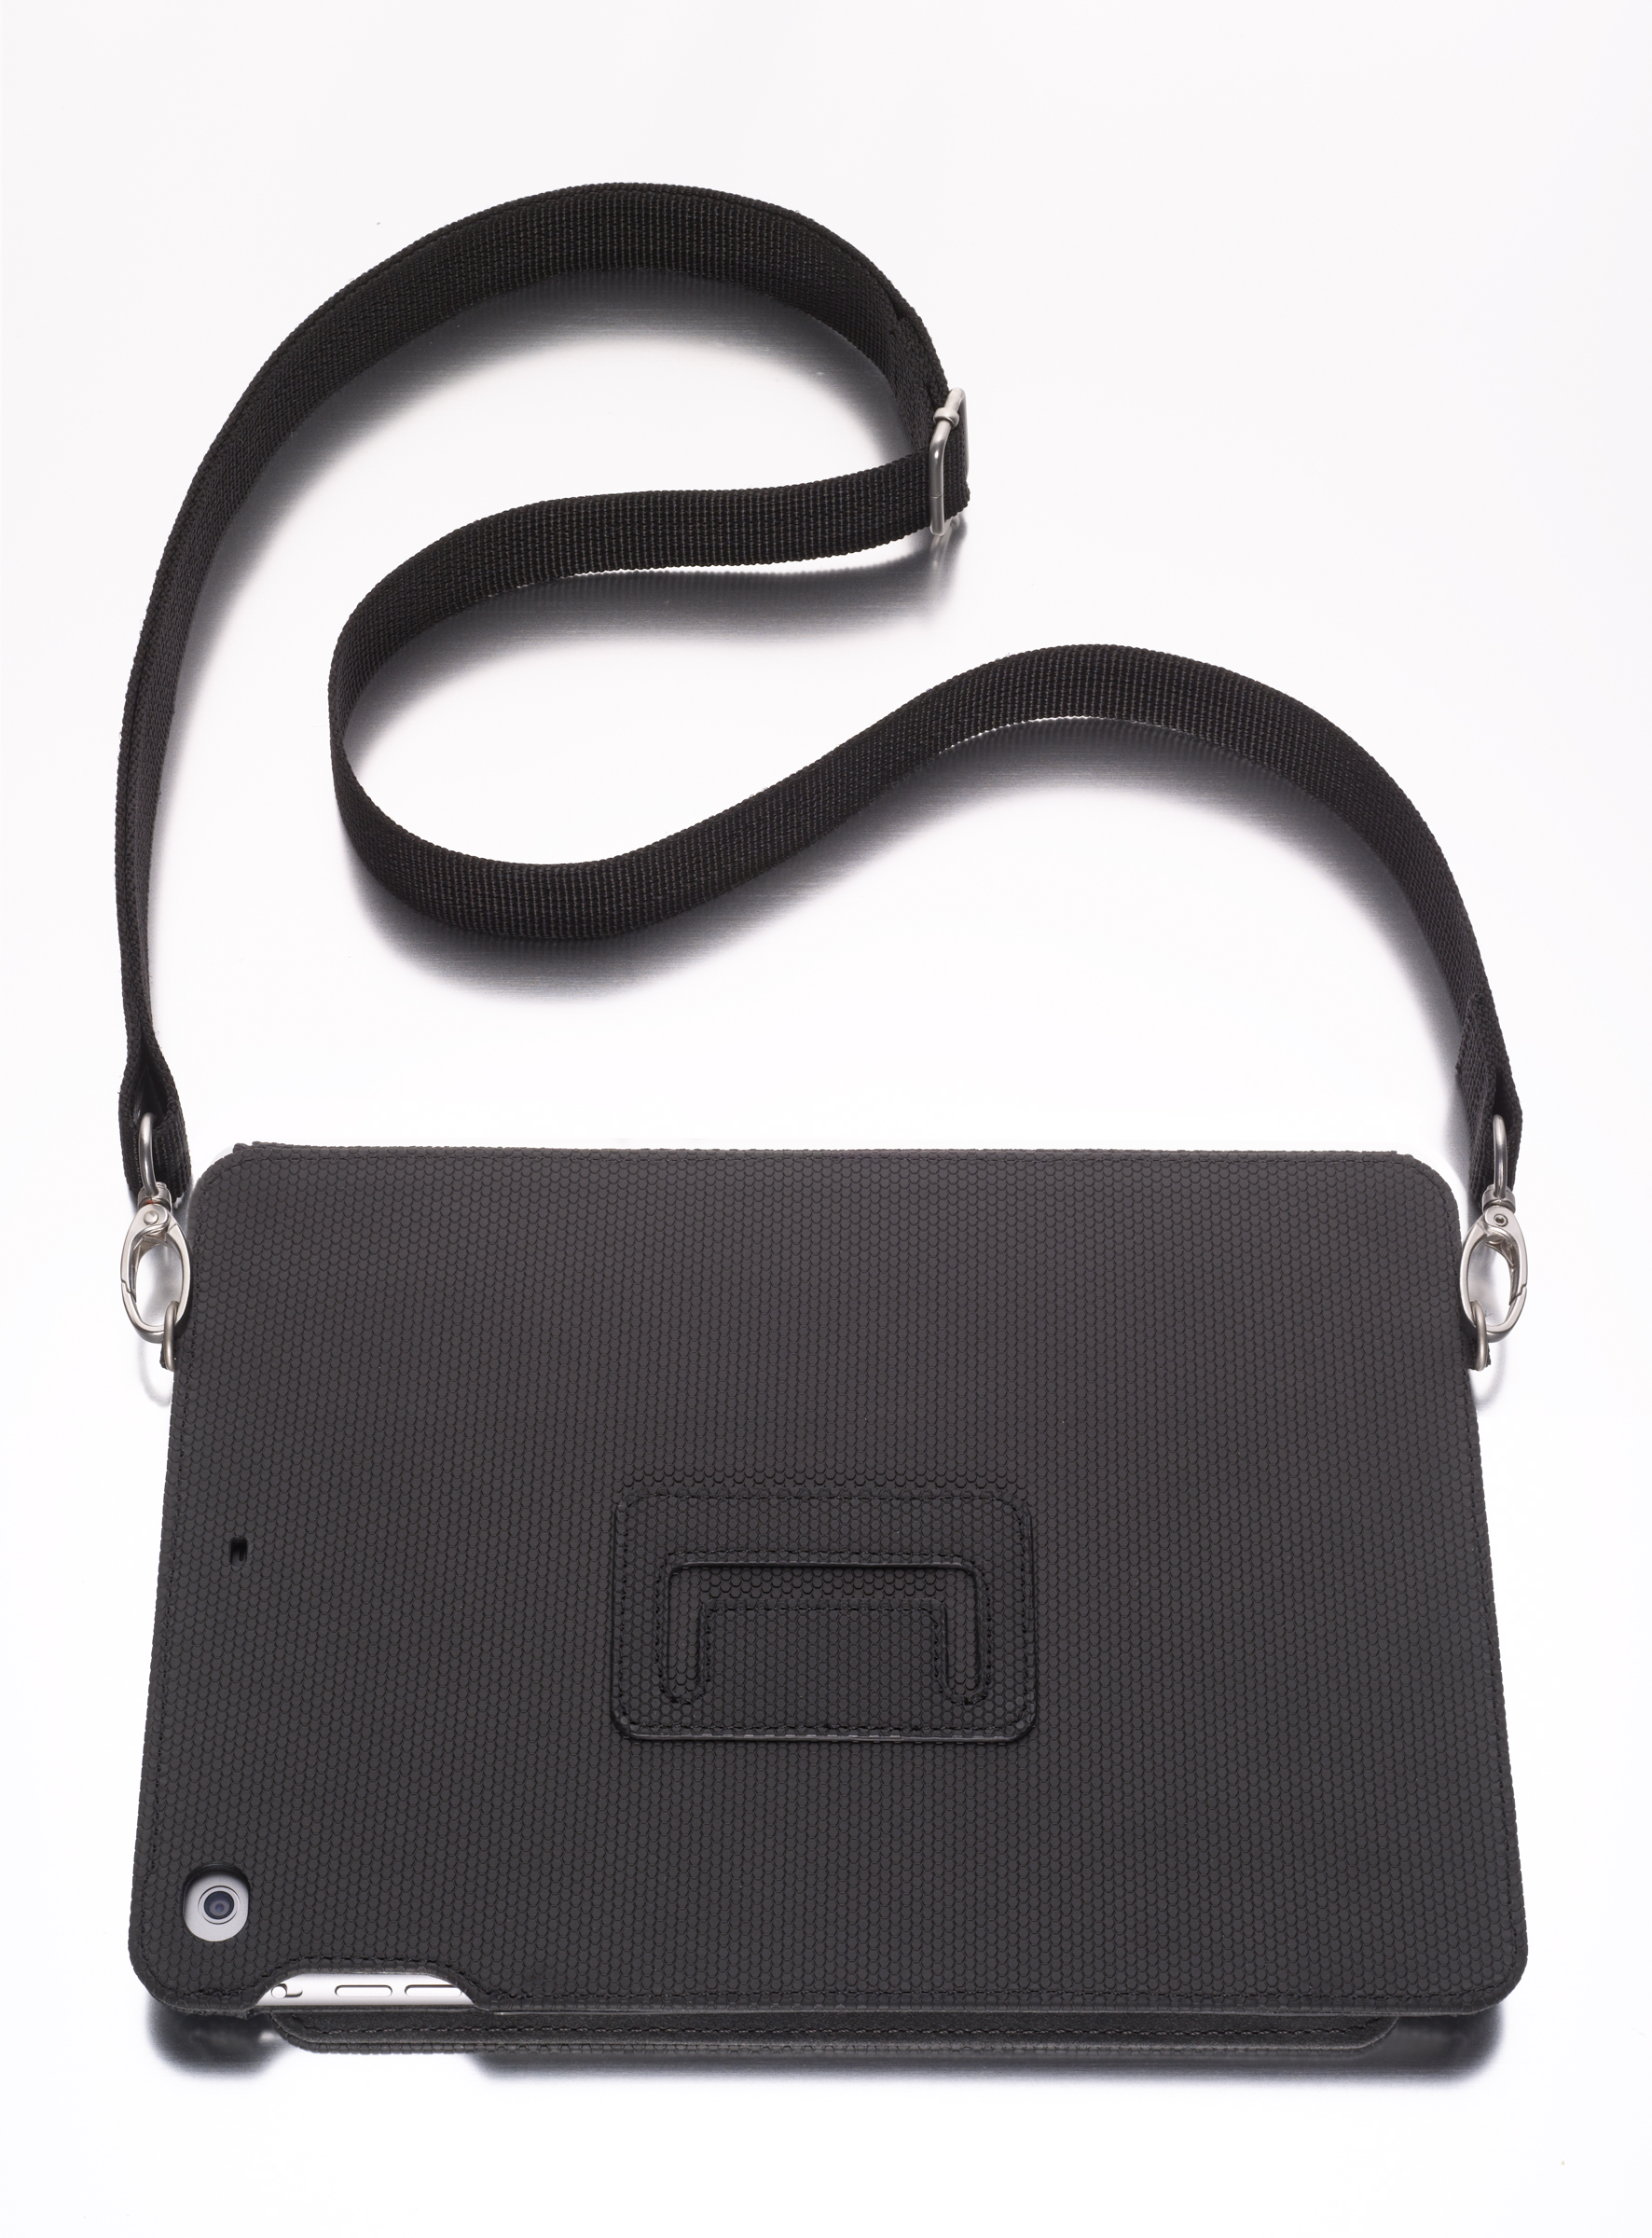 iPad Air 1 Air 2 Carry Case with Shoulder Strap